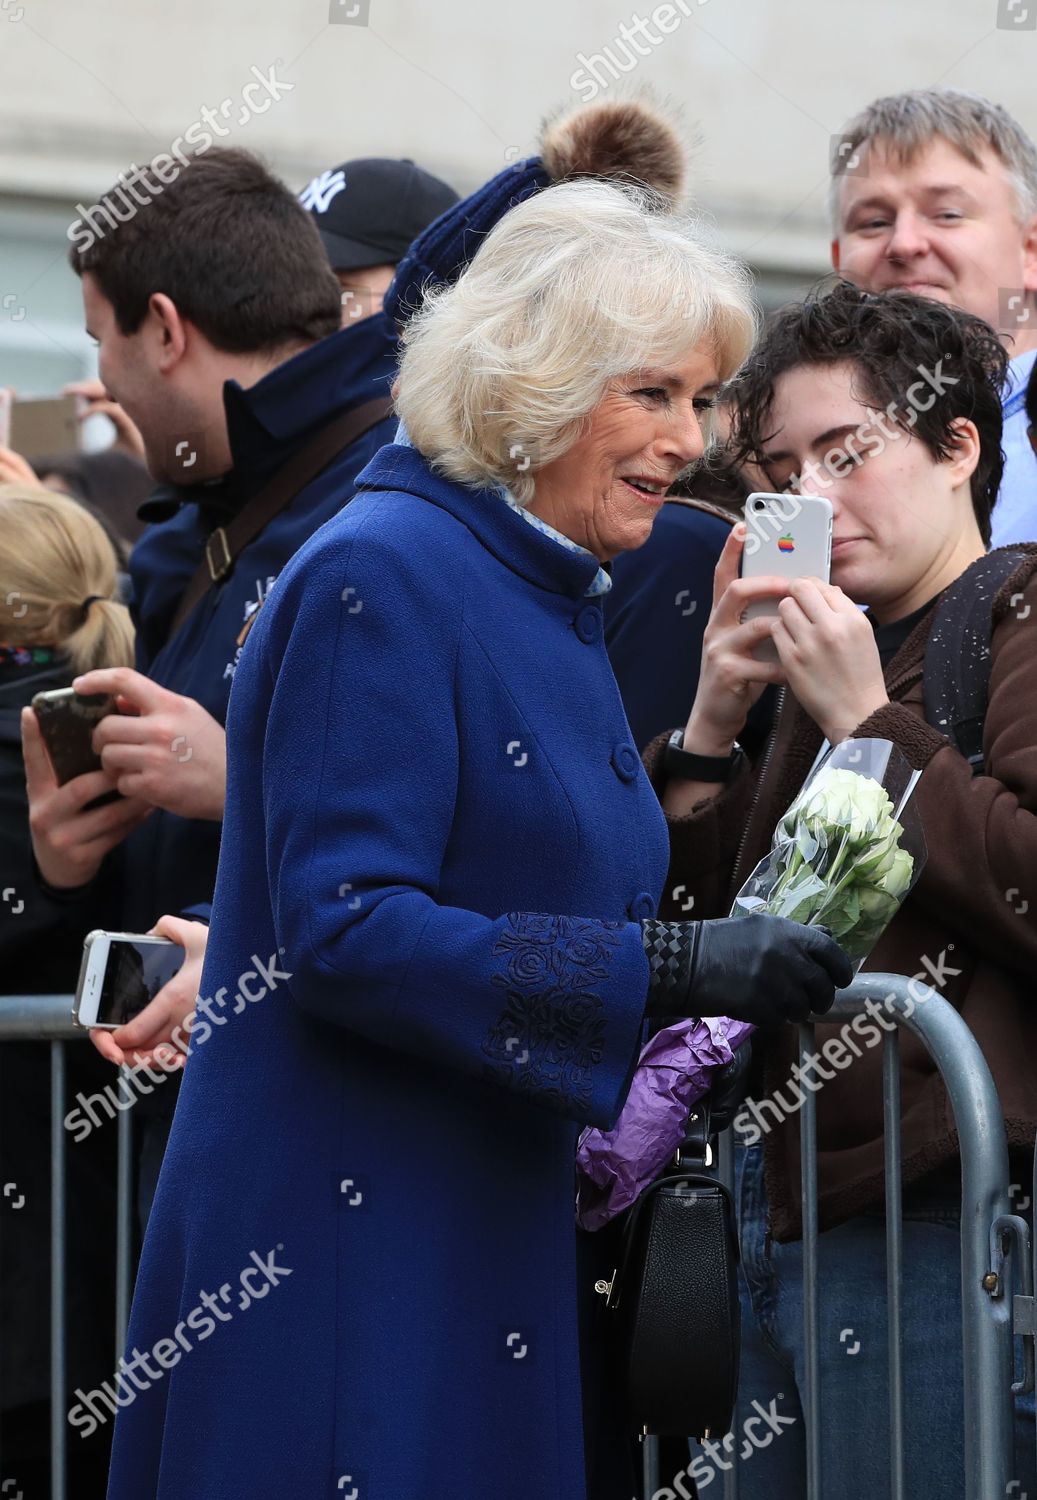 prince-charles-and-duchess-of-cornwall-visit-liverpool-uk-shutterstock-editorial-10102607f.jpg